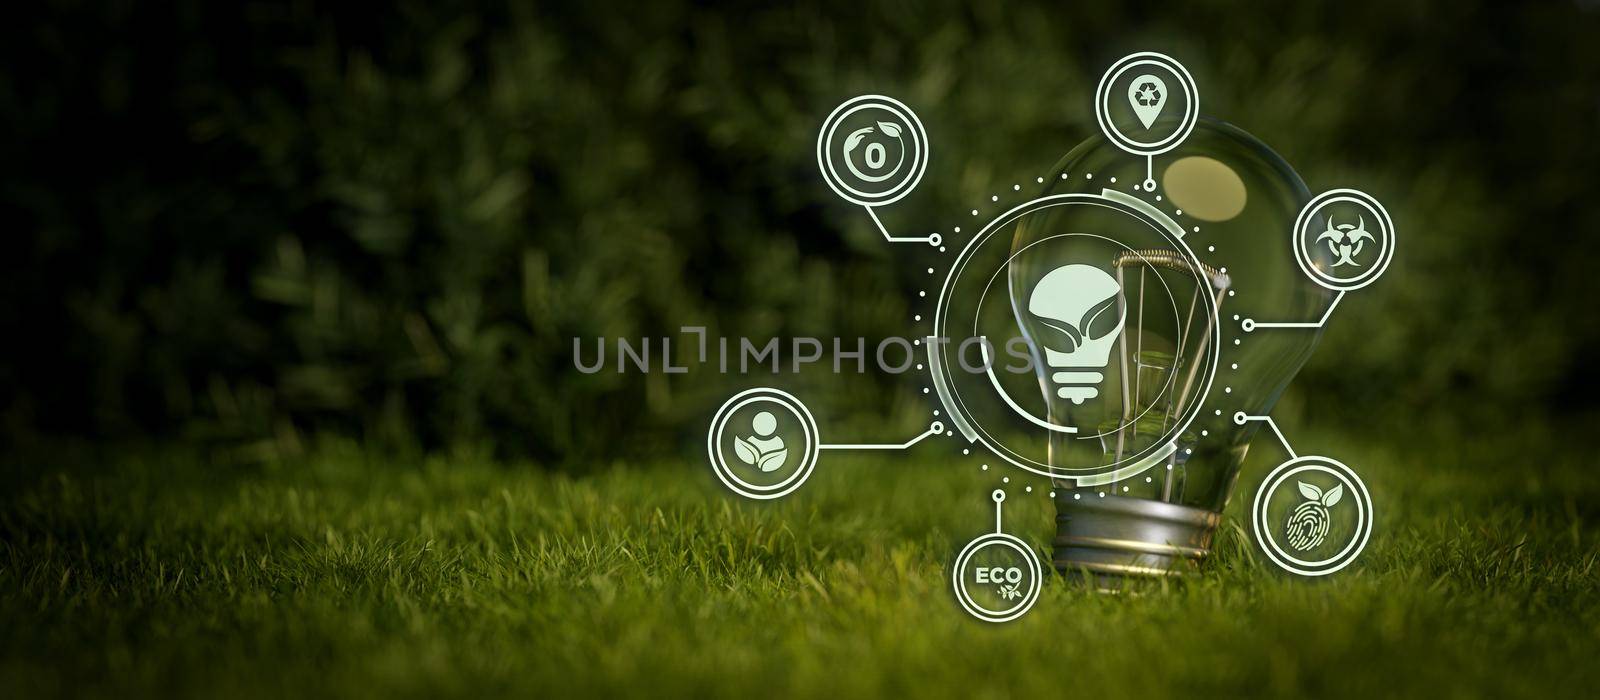 Abstract Eco ESG Lightbulb Modernization Environmental Social Governance Conservation And CSR Policy. Earth Globe With Forest Background Illustrative Banner Background 3D Illustration